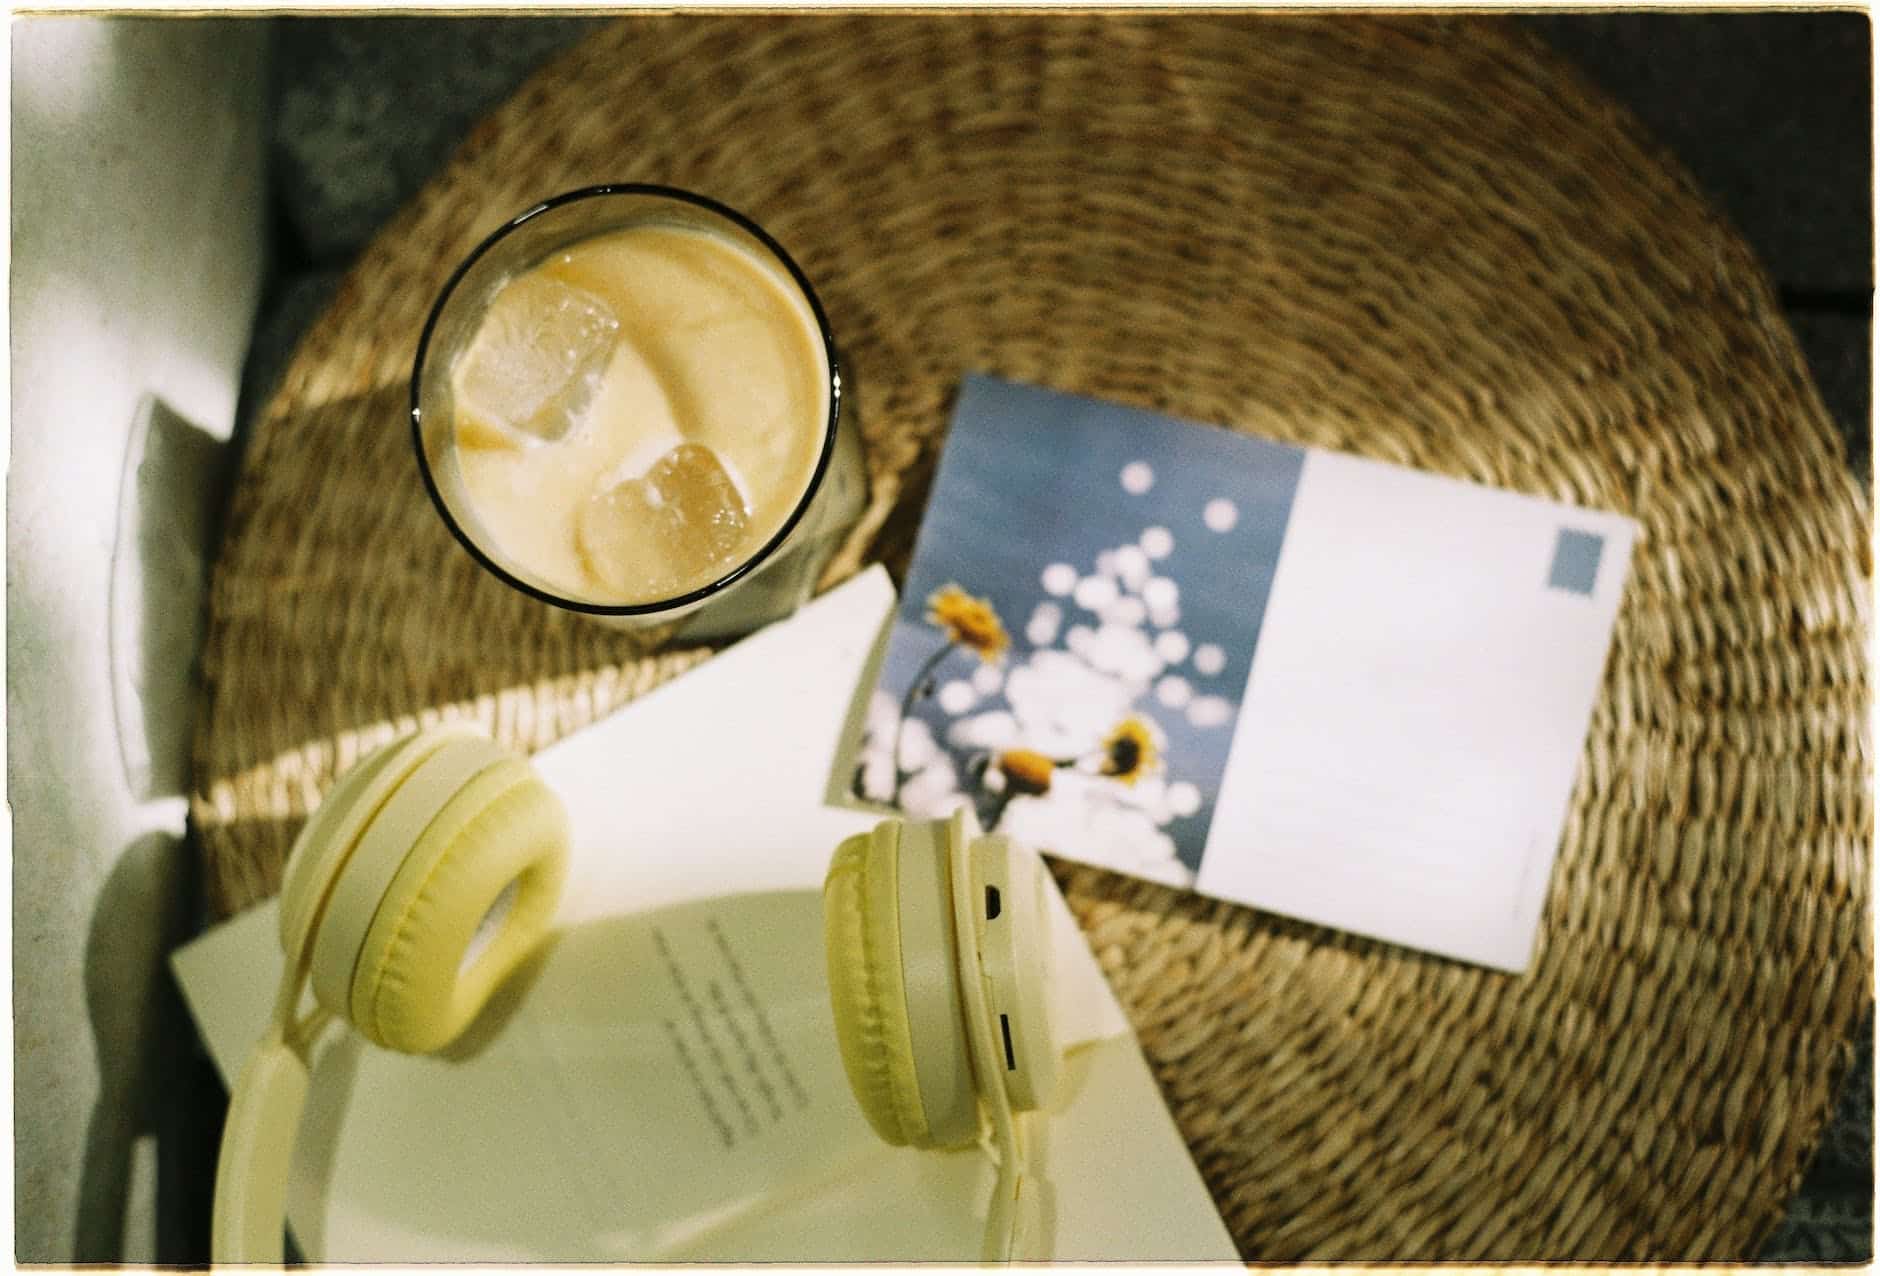 ice coffee headphones and a postcard on a wicker basket